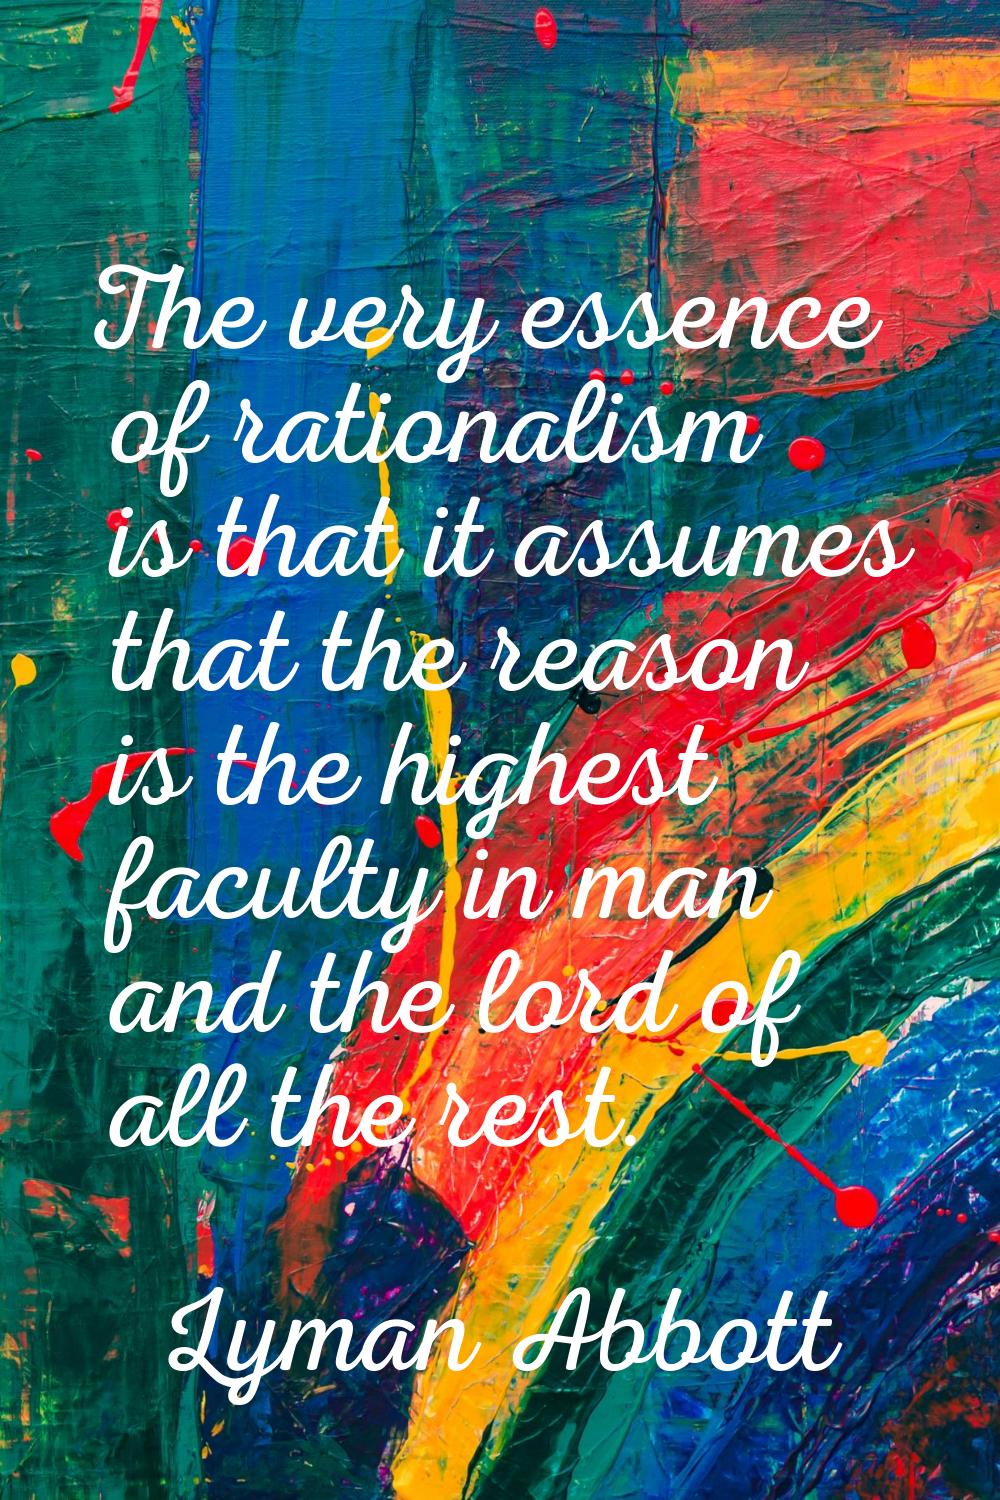 The very essence of rationalism is that it assumes that the reason is the highest faculty in man an